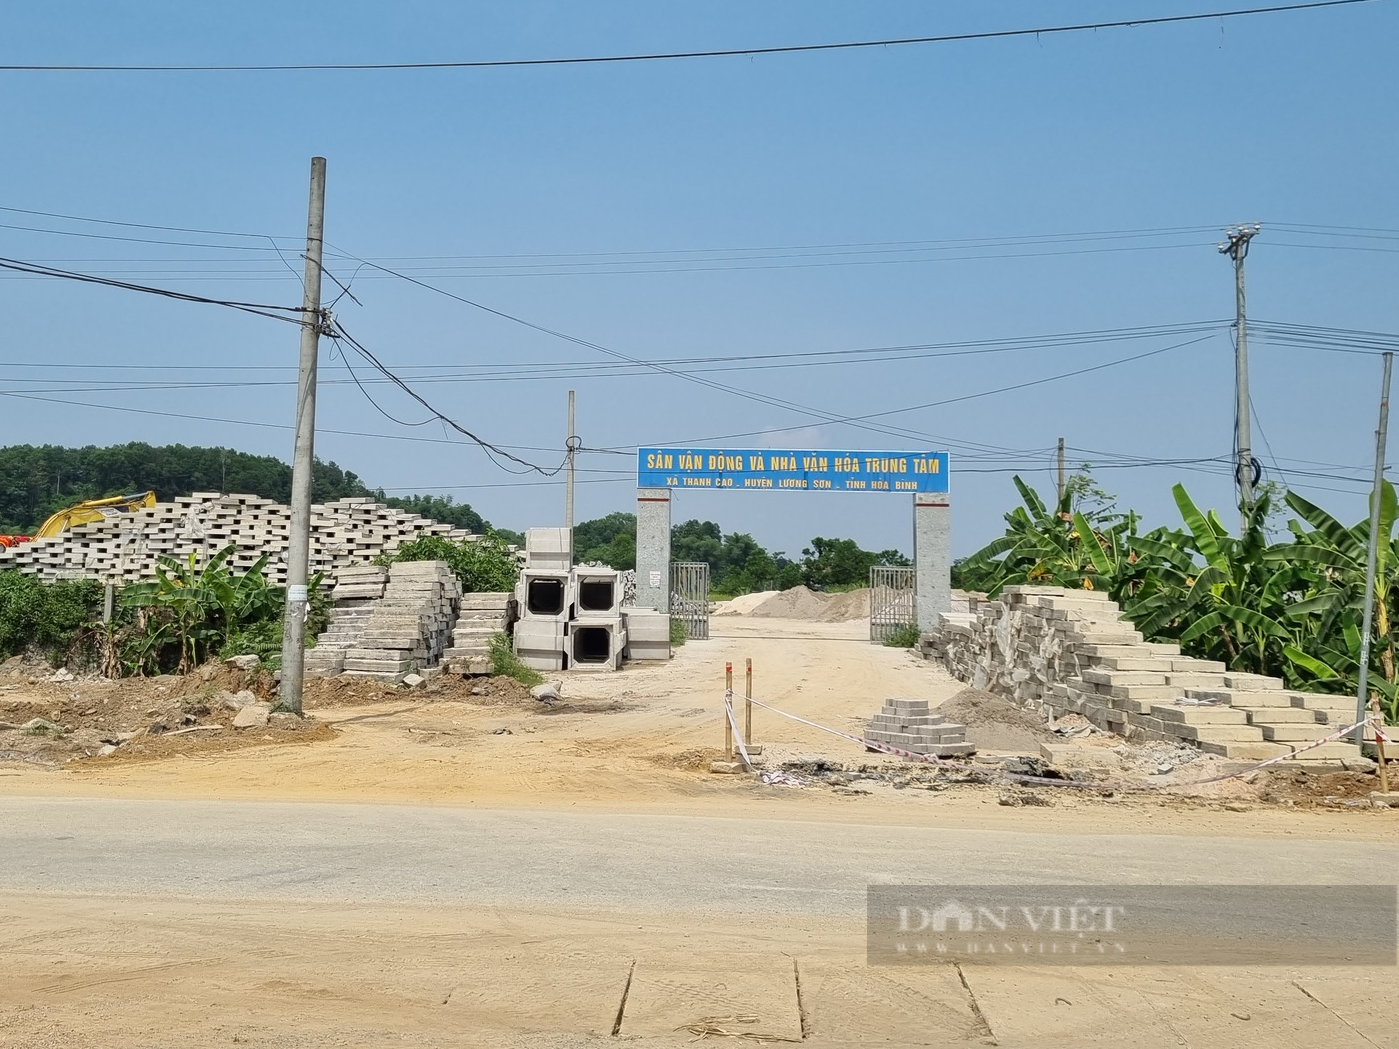 Multibillion dollar stadium turned into illegal materials storage in Hoa Binh: Business forced to relocate - Photo 4.